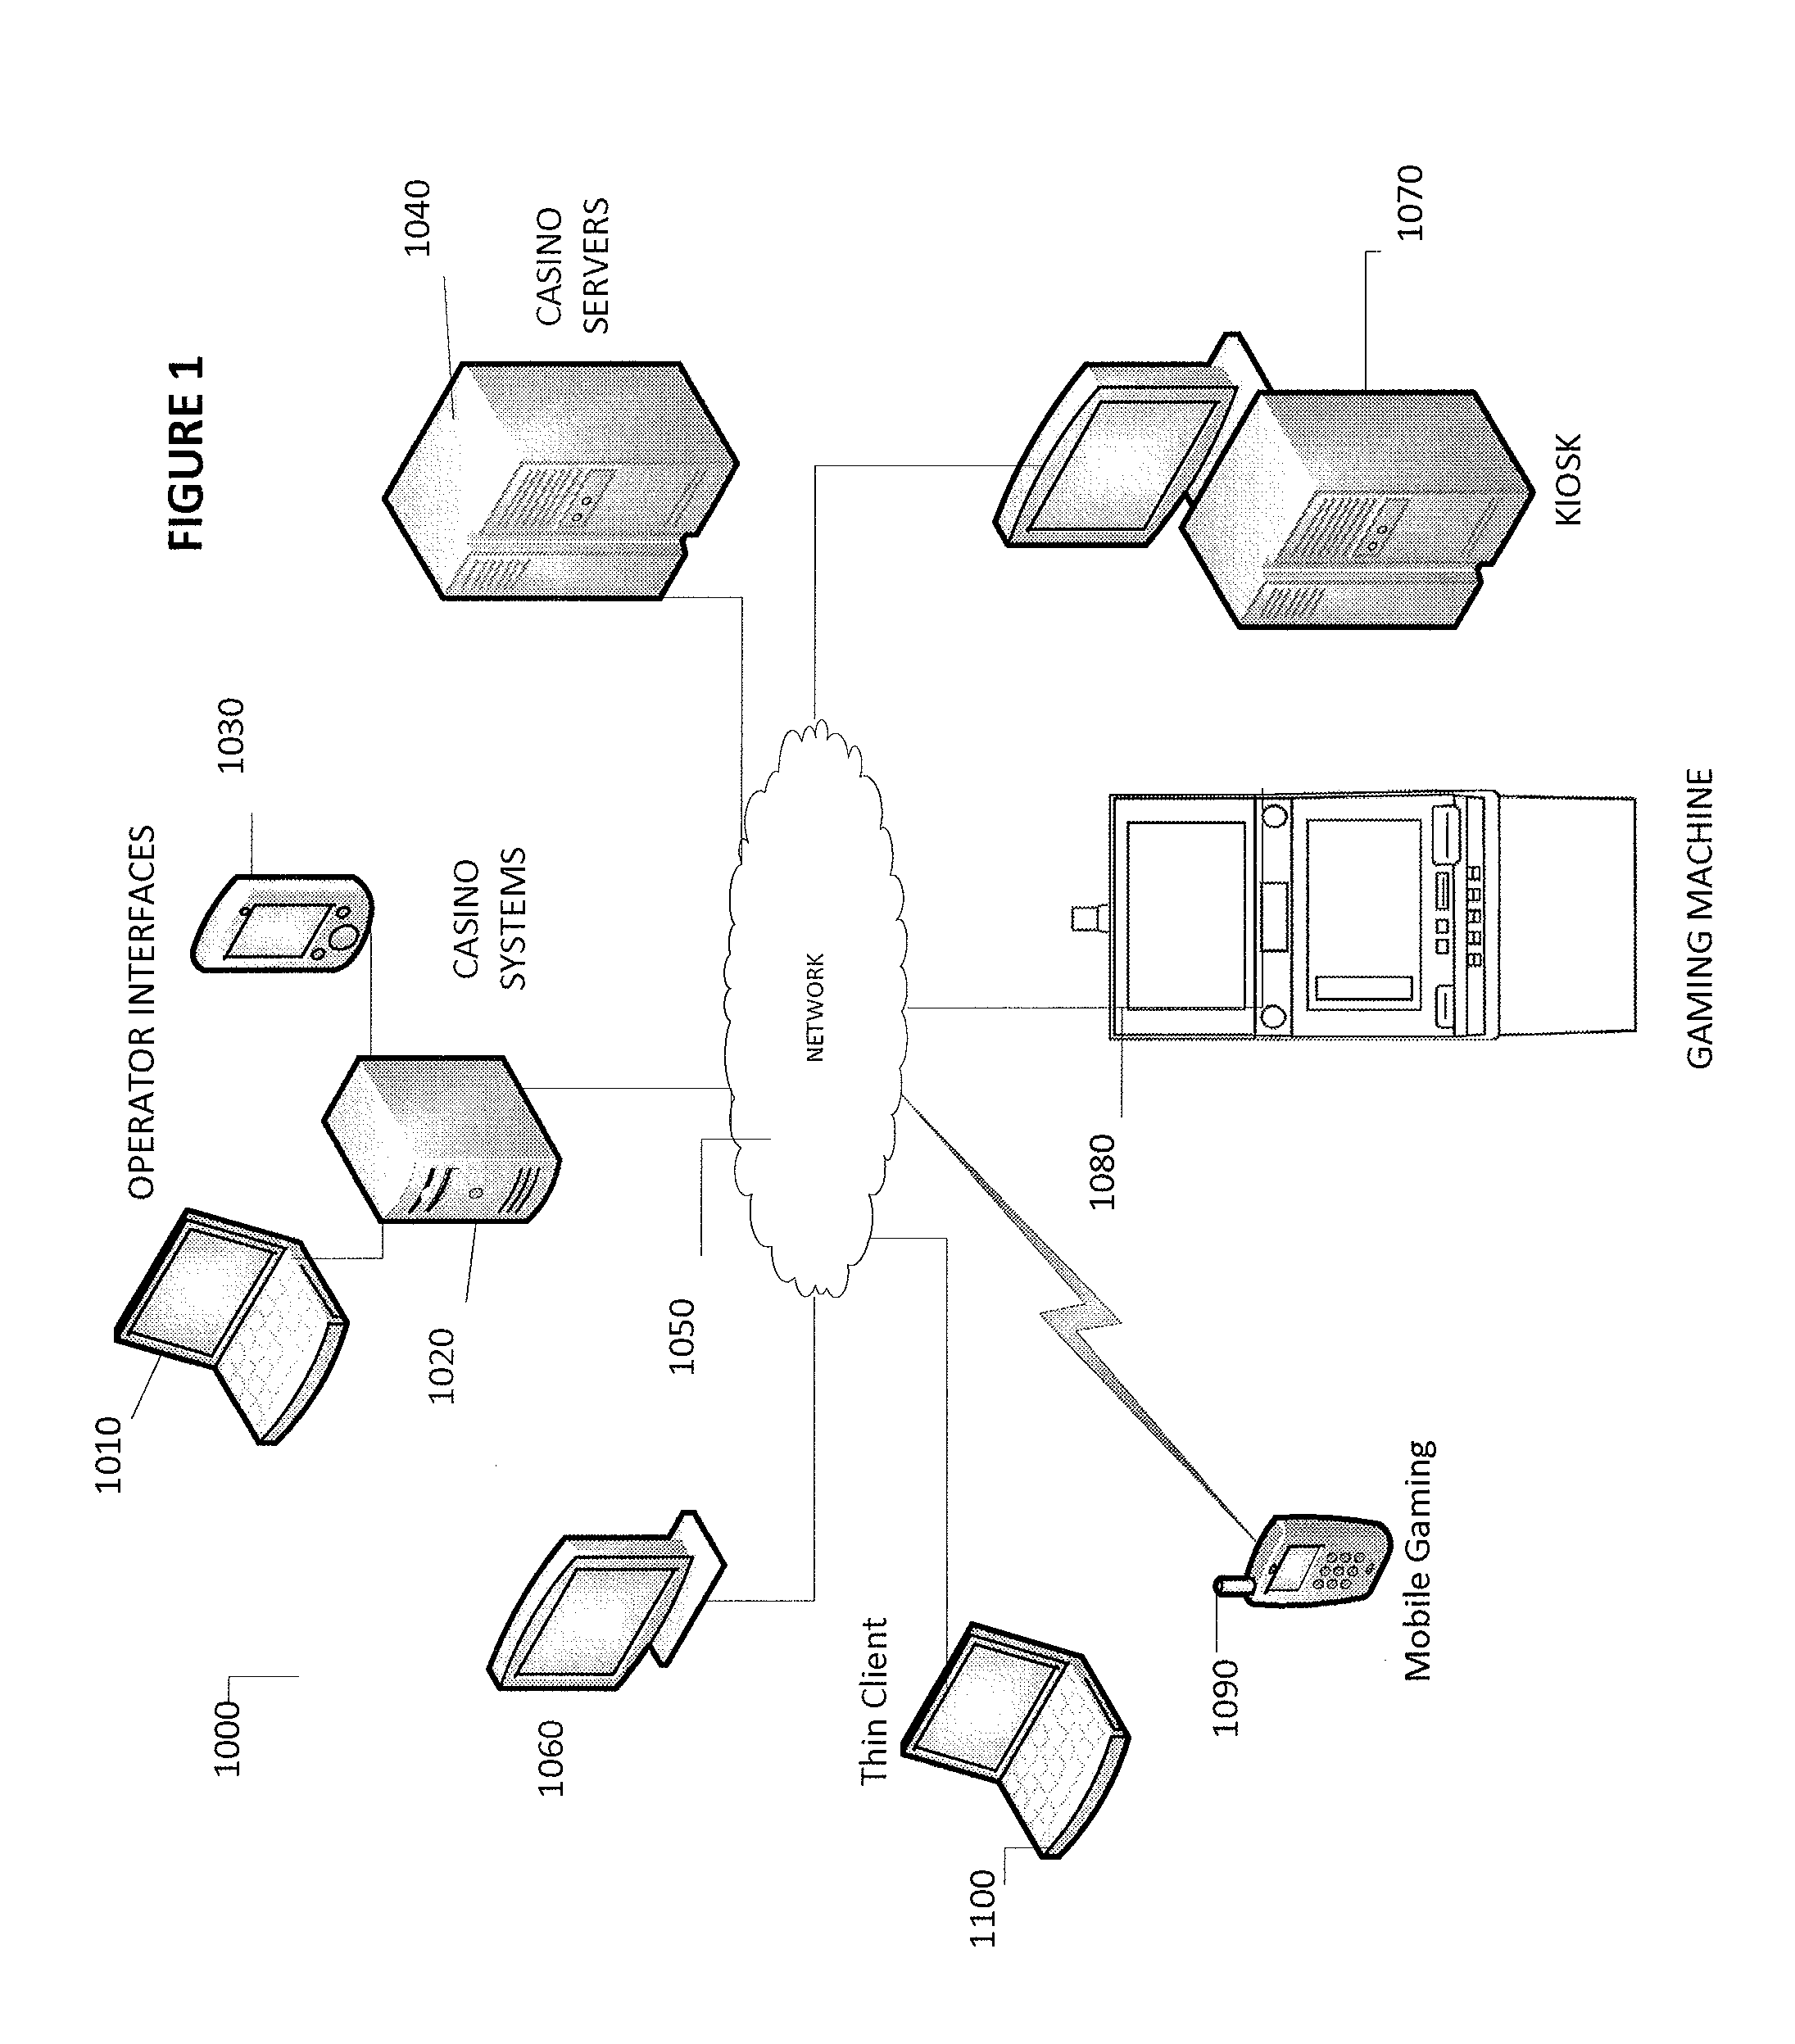 Gaming reward and promotions system and gaming machines utilizing cash tickets having a feature trigger